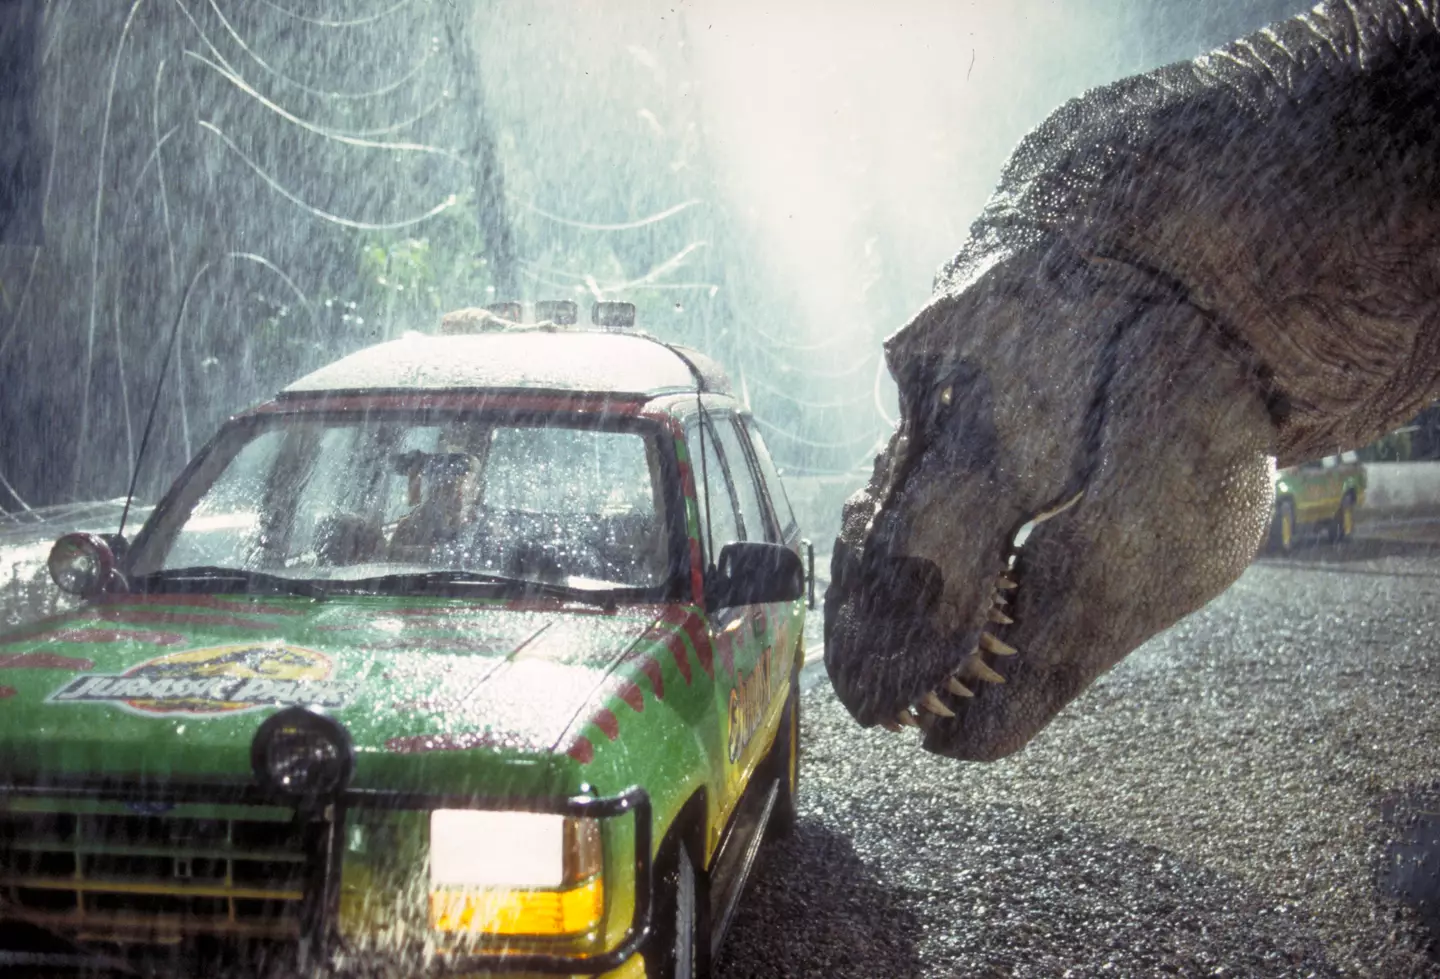 Even though Jurassic Park portrayed dinosaurs very well, it turns out they got quite a few things wrong.